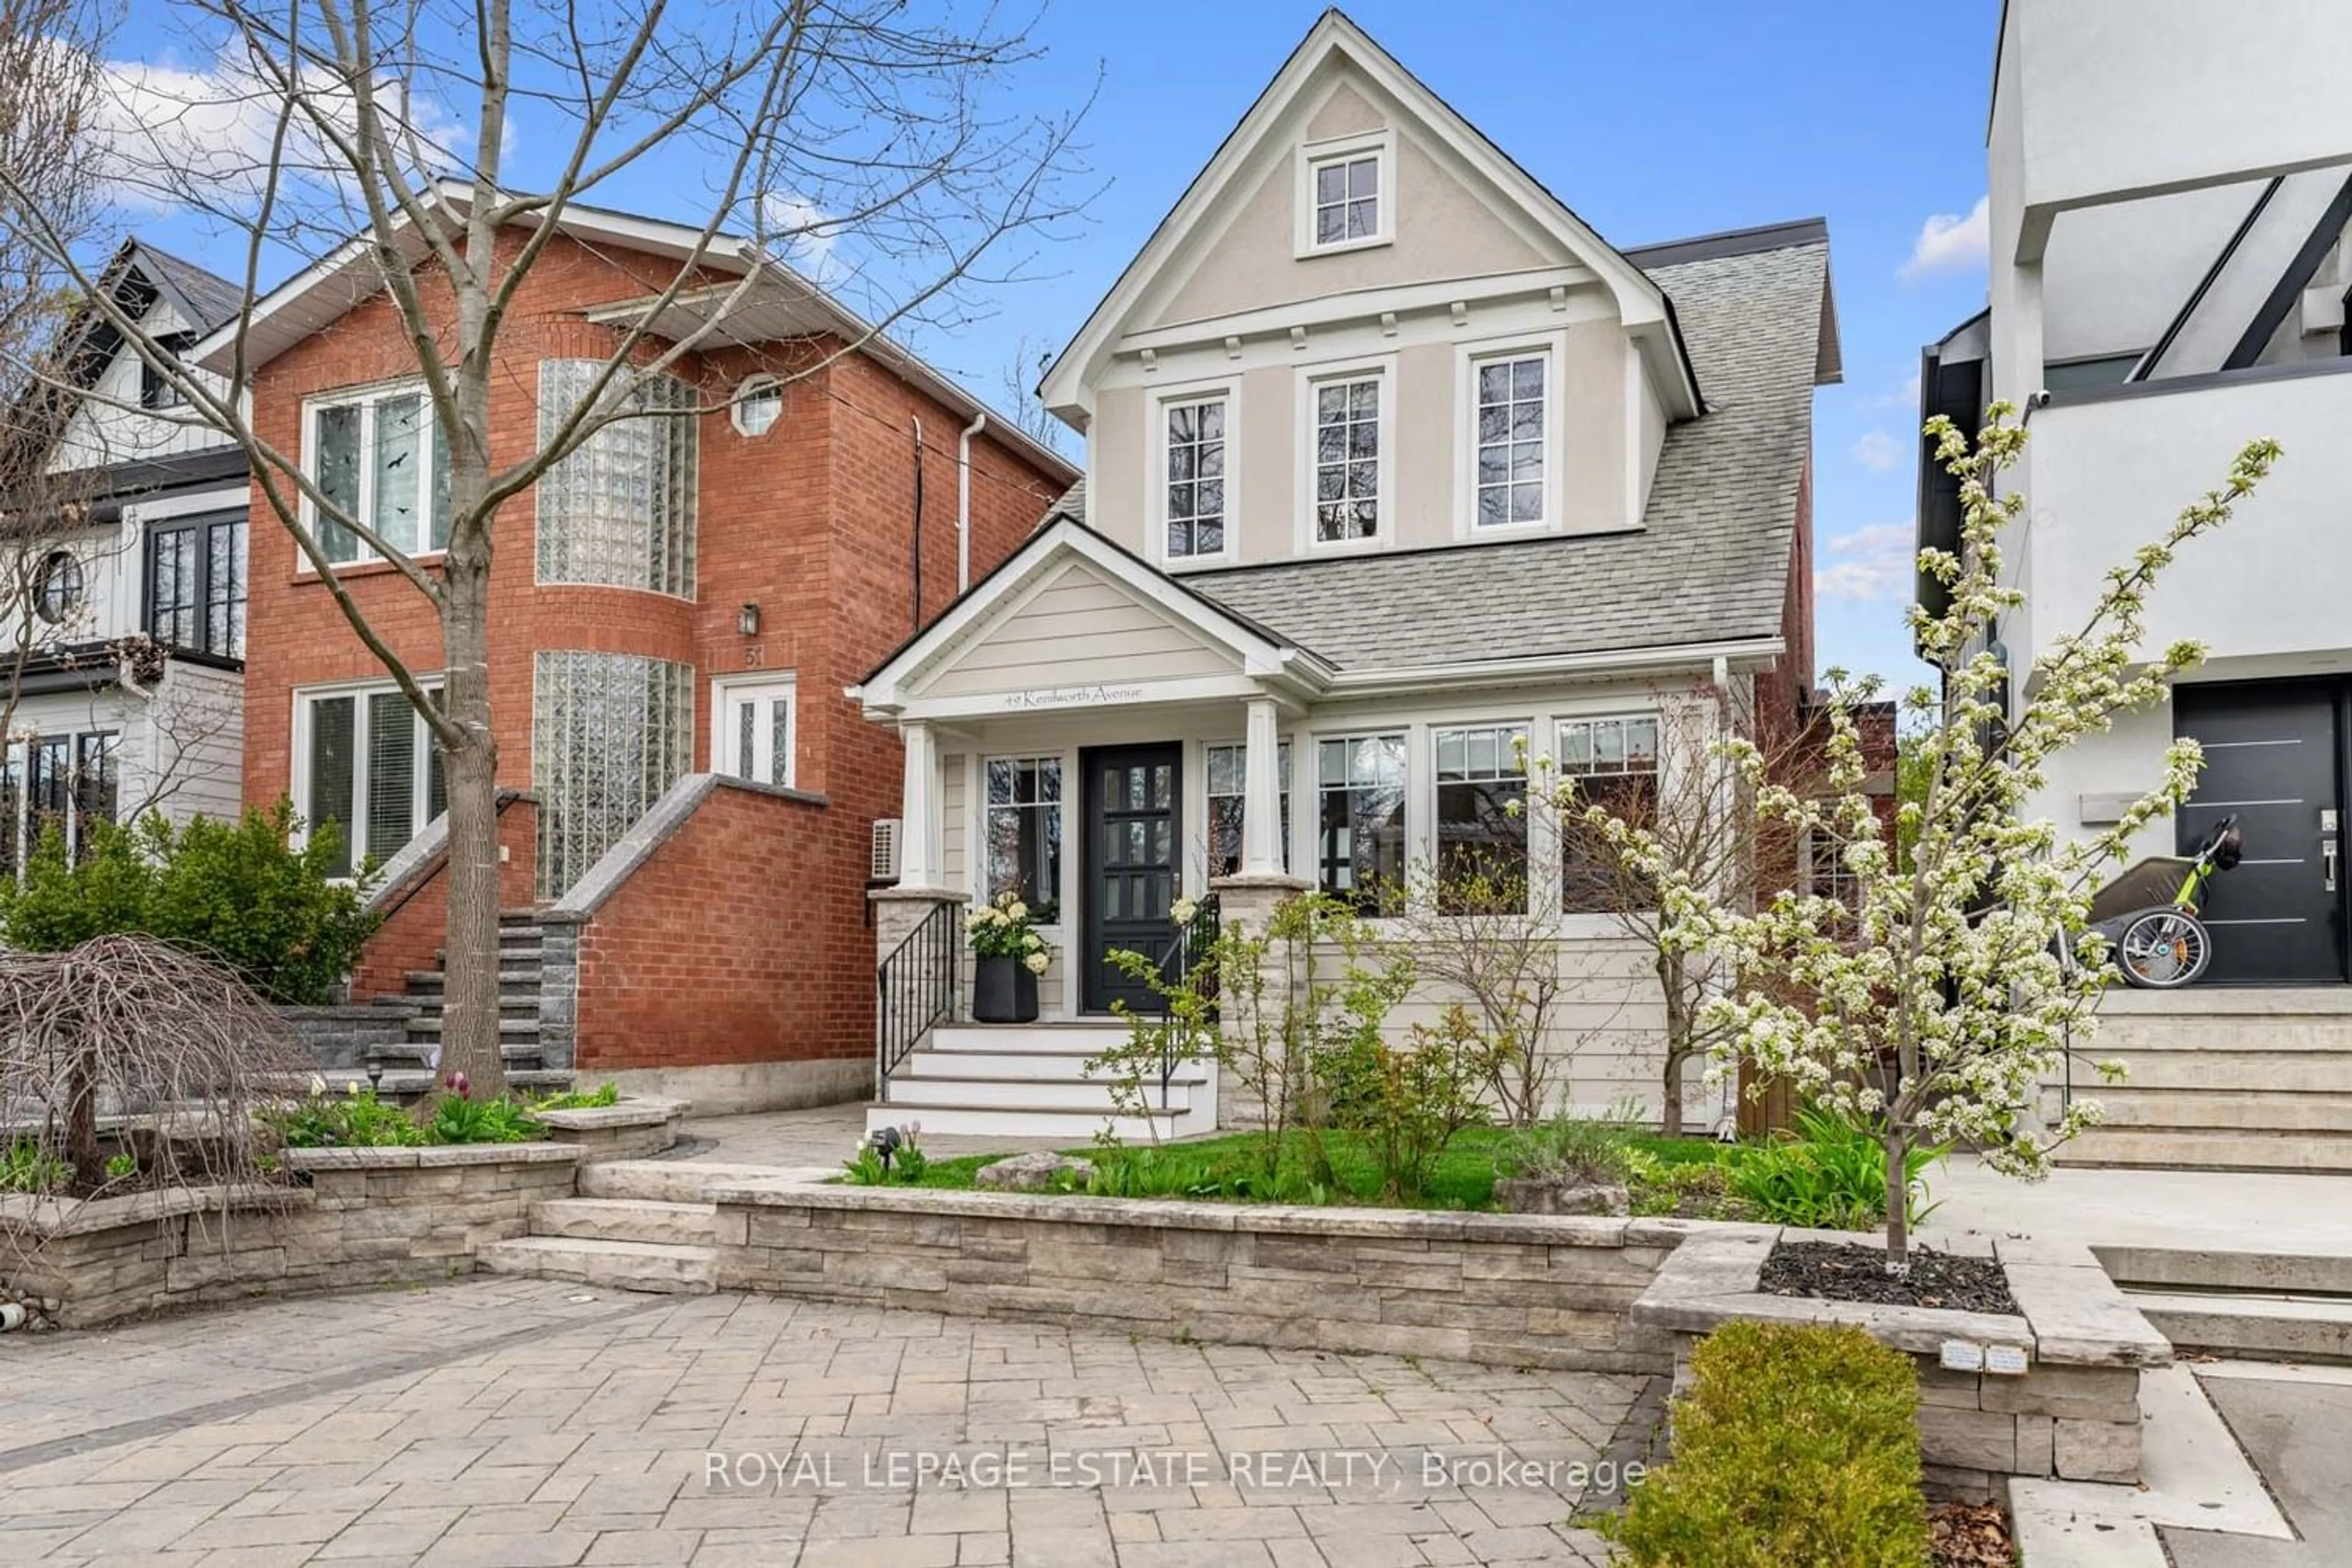 Home with brick exterior material for 49 Kenilworth Ave, Toronto Ontario M4L 3S4